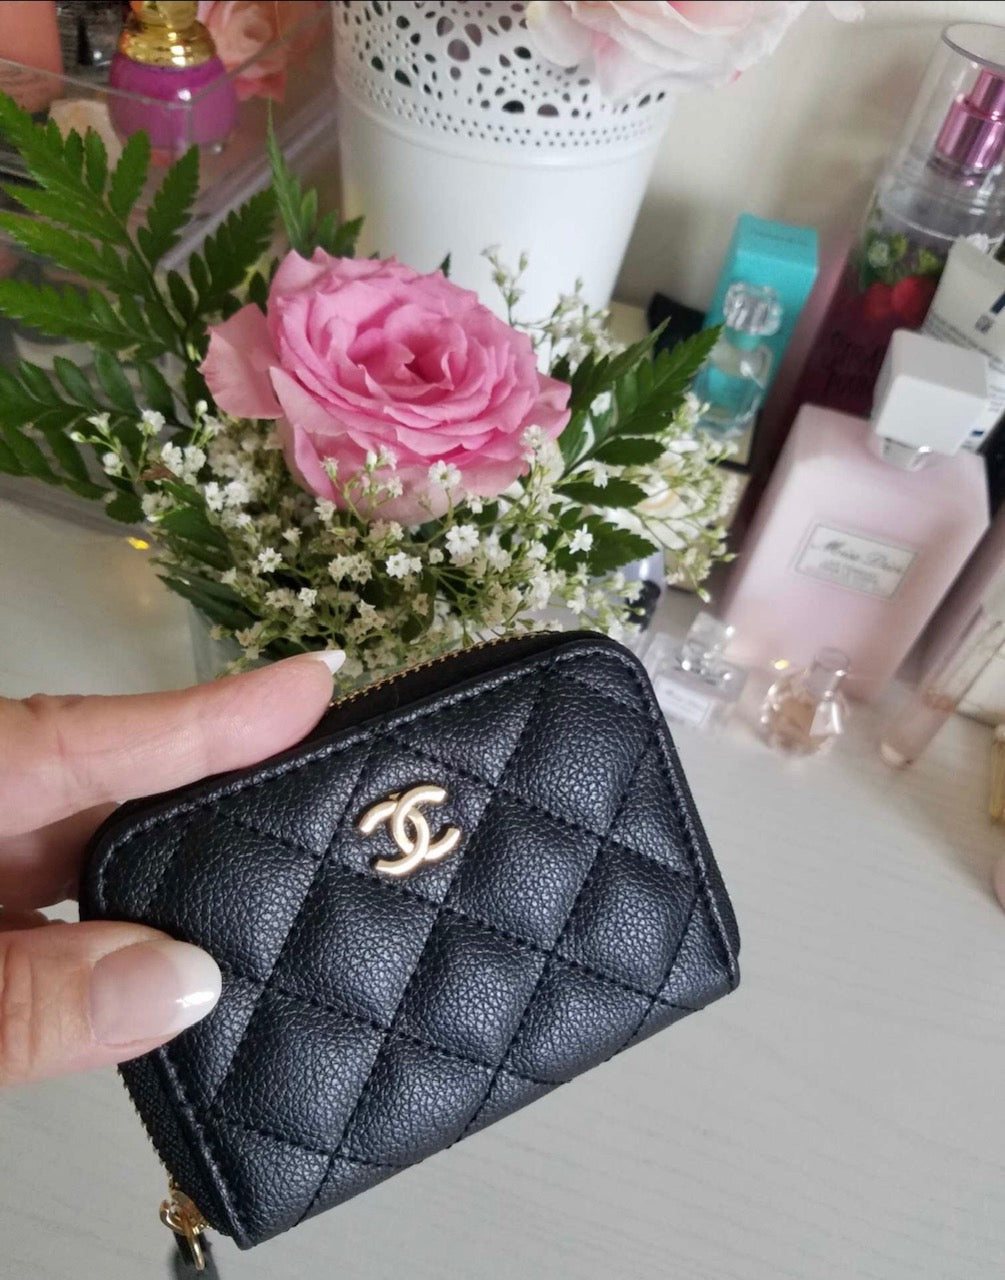 CHANEL BOY CHANEL Leather Long Wallet Small Wallet Bridal Logo Coin Cases  (A80602 B05006 NB360, A08062 B05006 NB355, A80602 B05006 NB358)